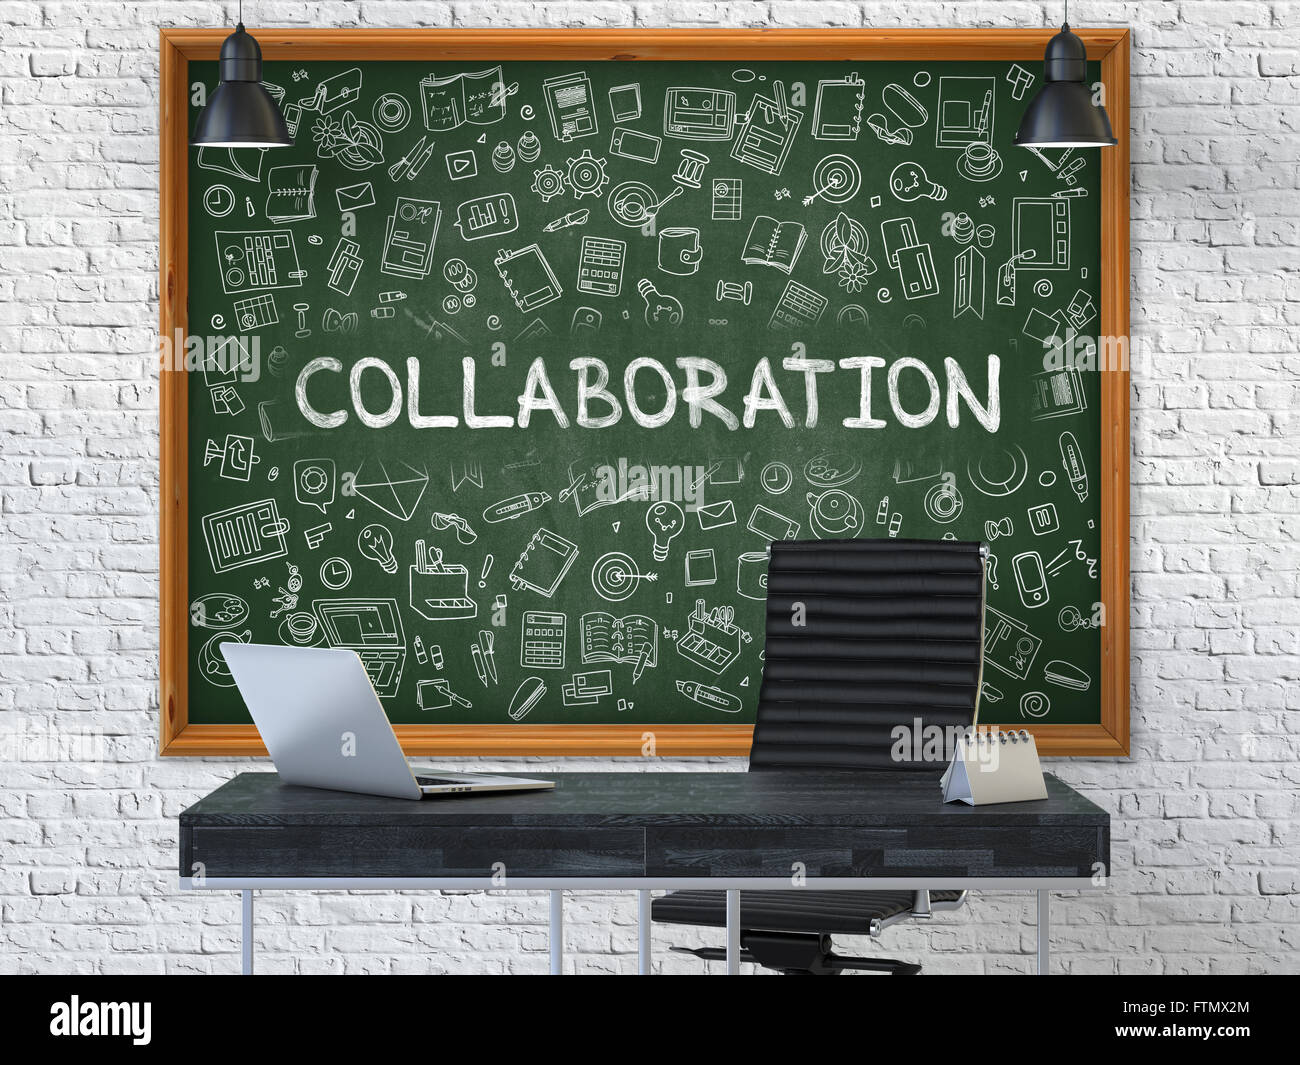 Collaboration Concept. Doodle Icons on Chalkboard. Stock Photo